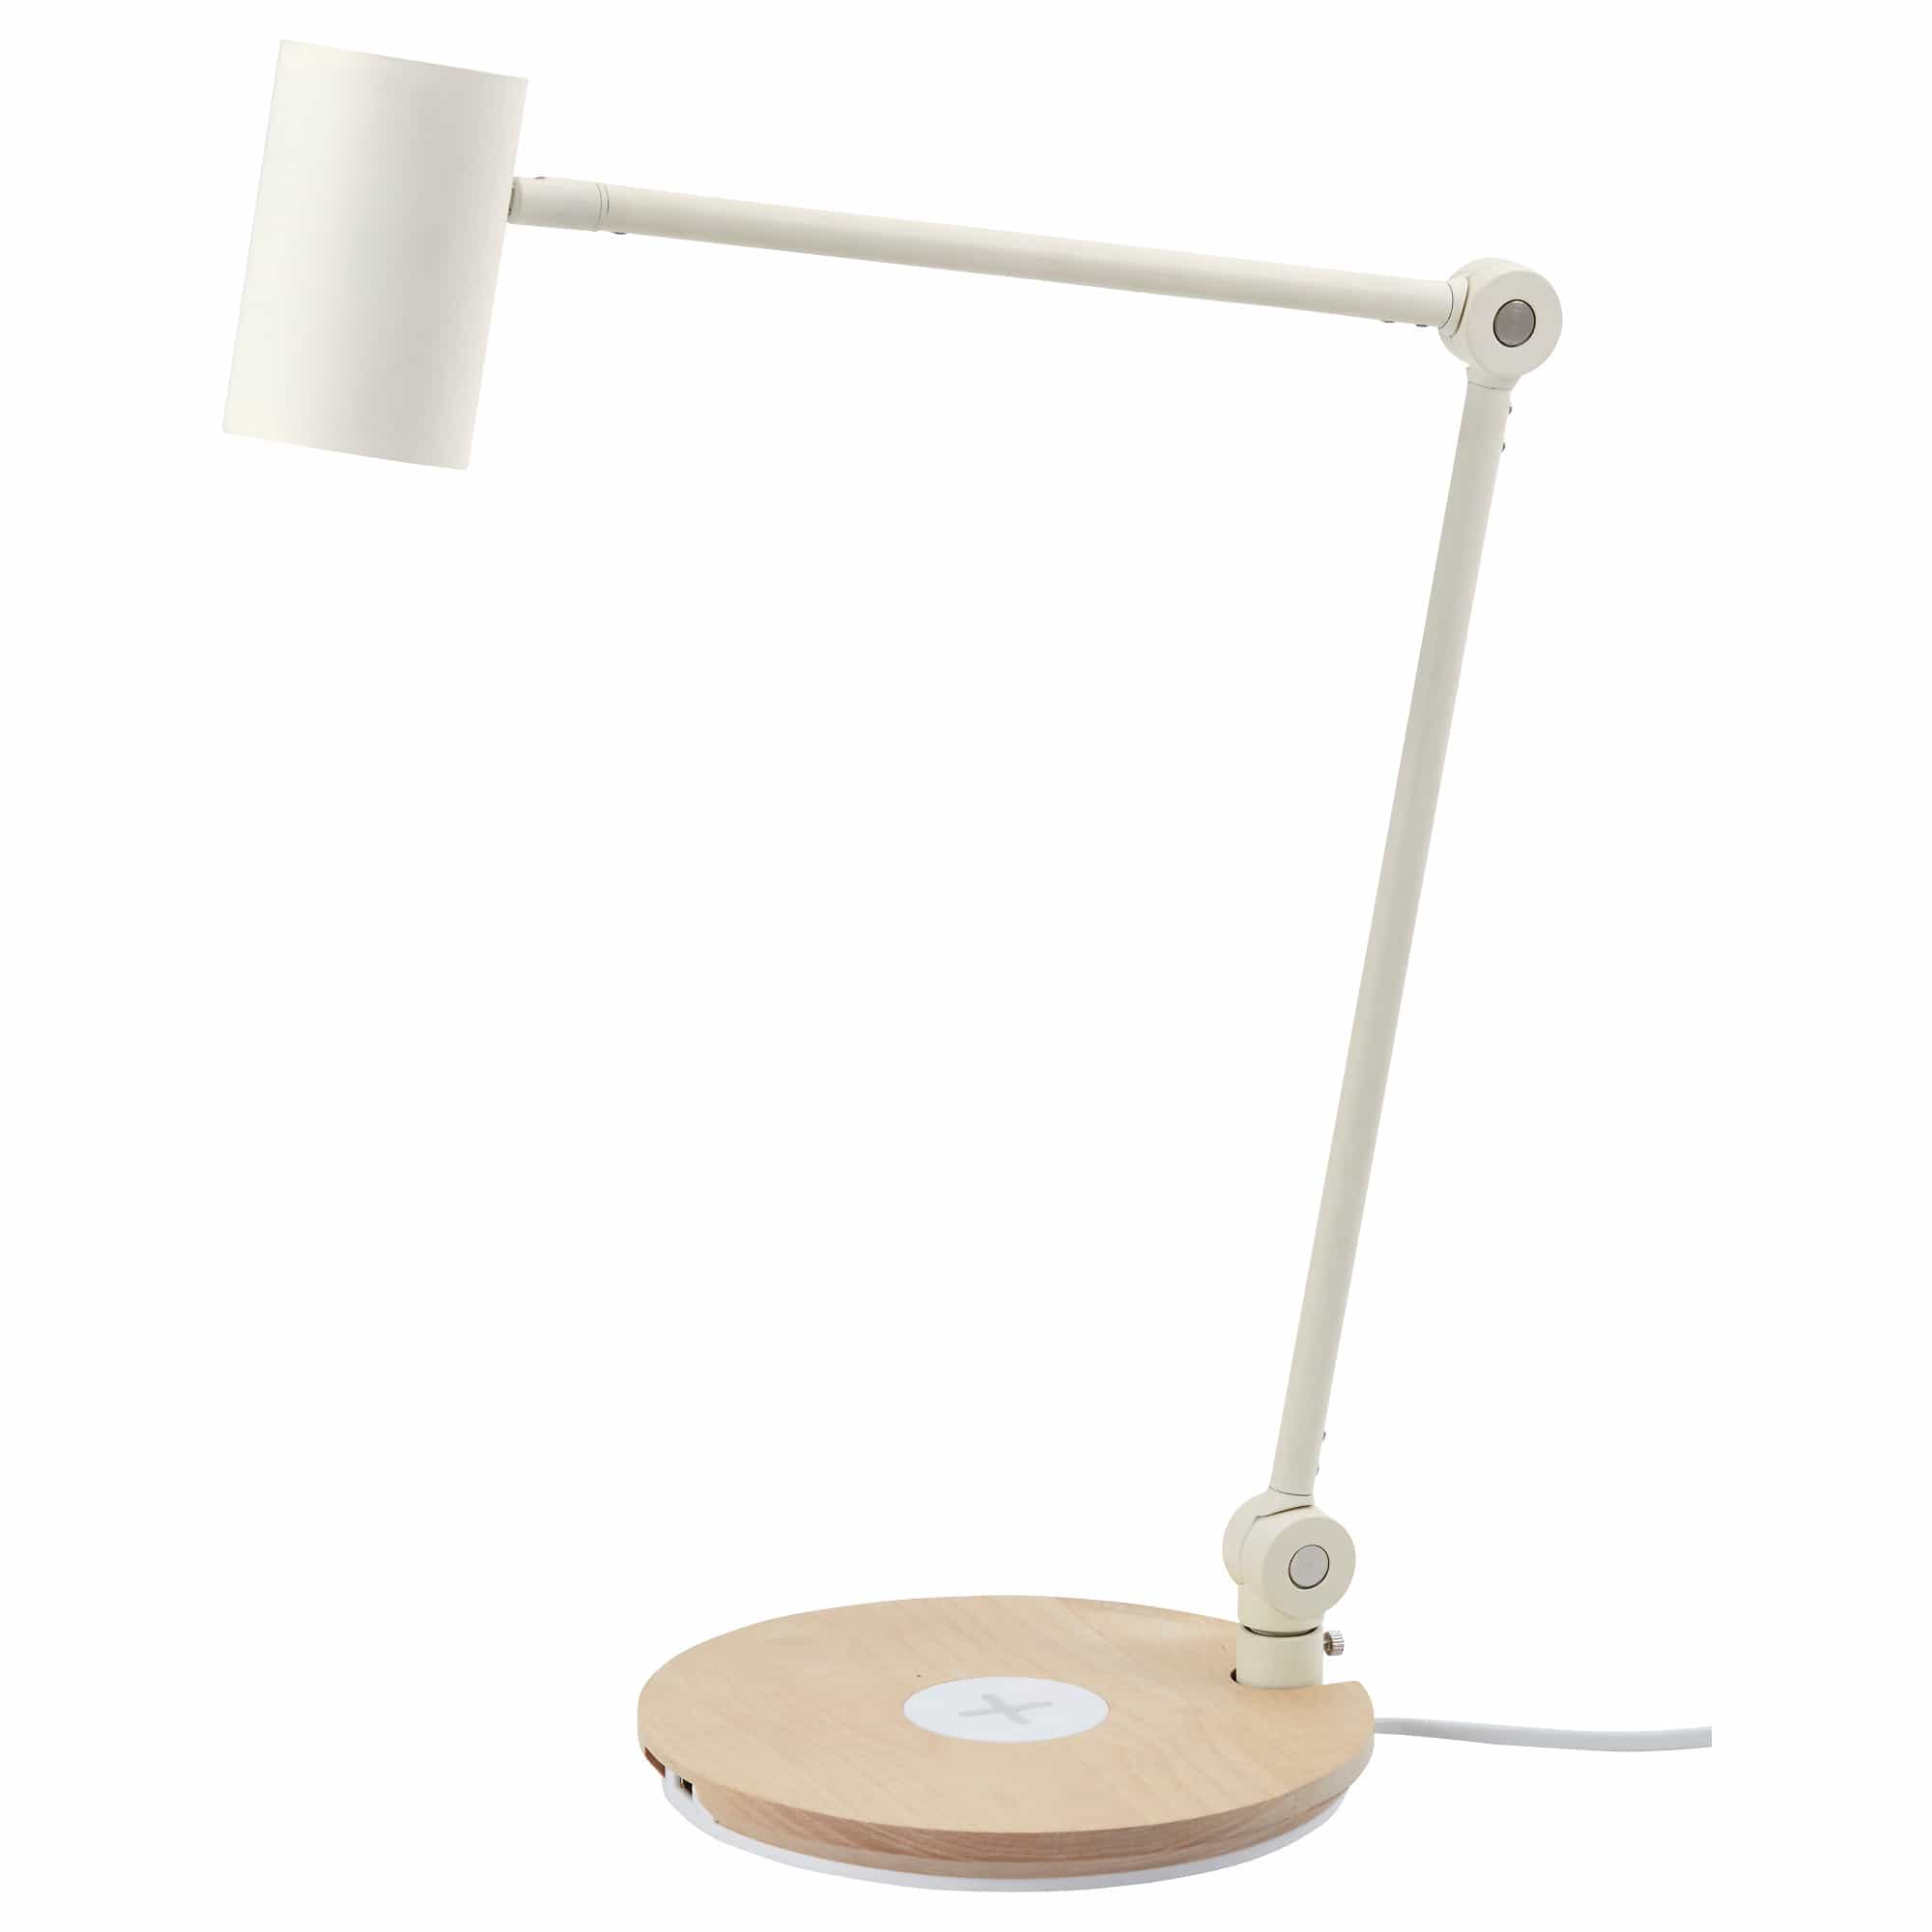 The Ikea Riggad wireless charging lamp is more than your typical charger.